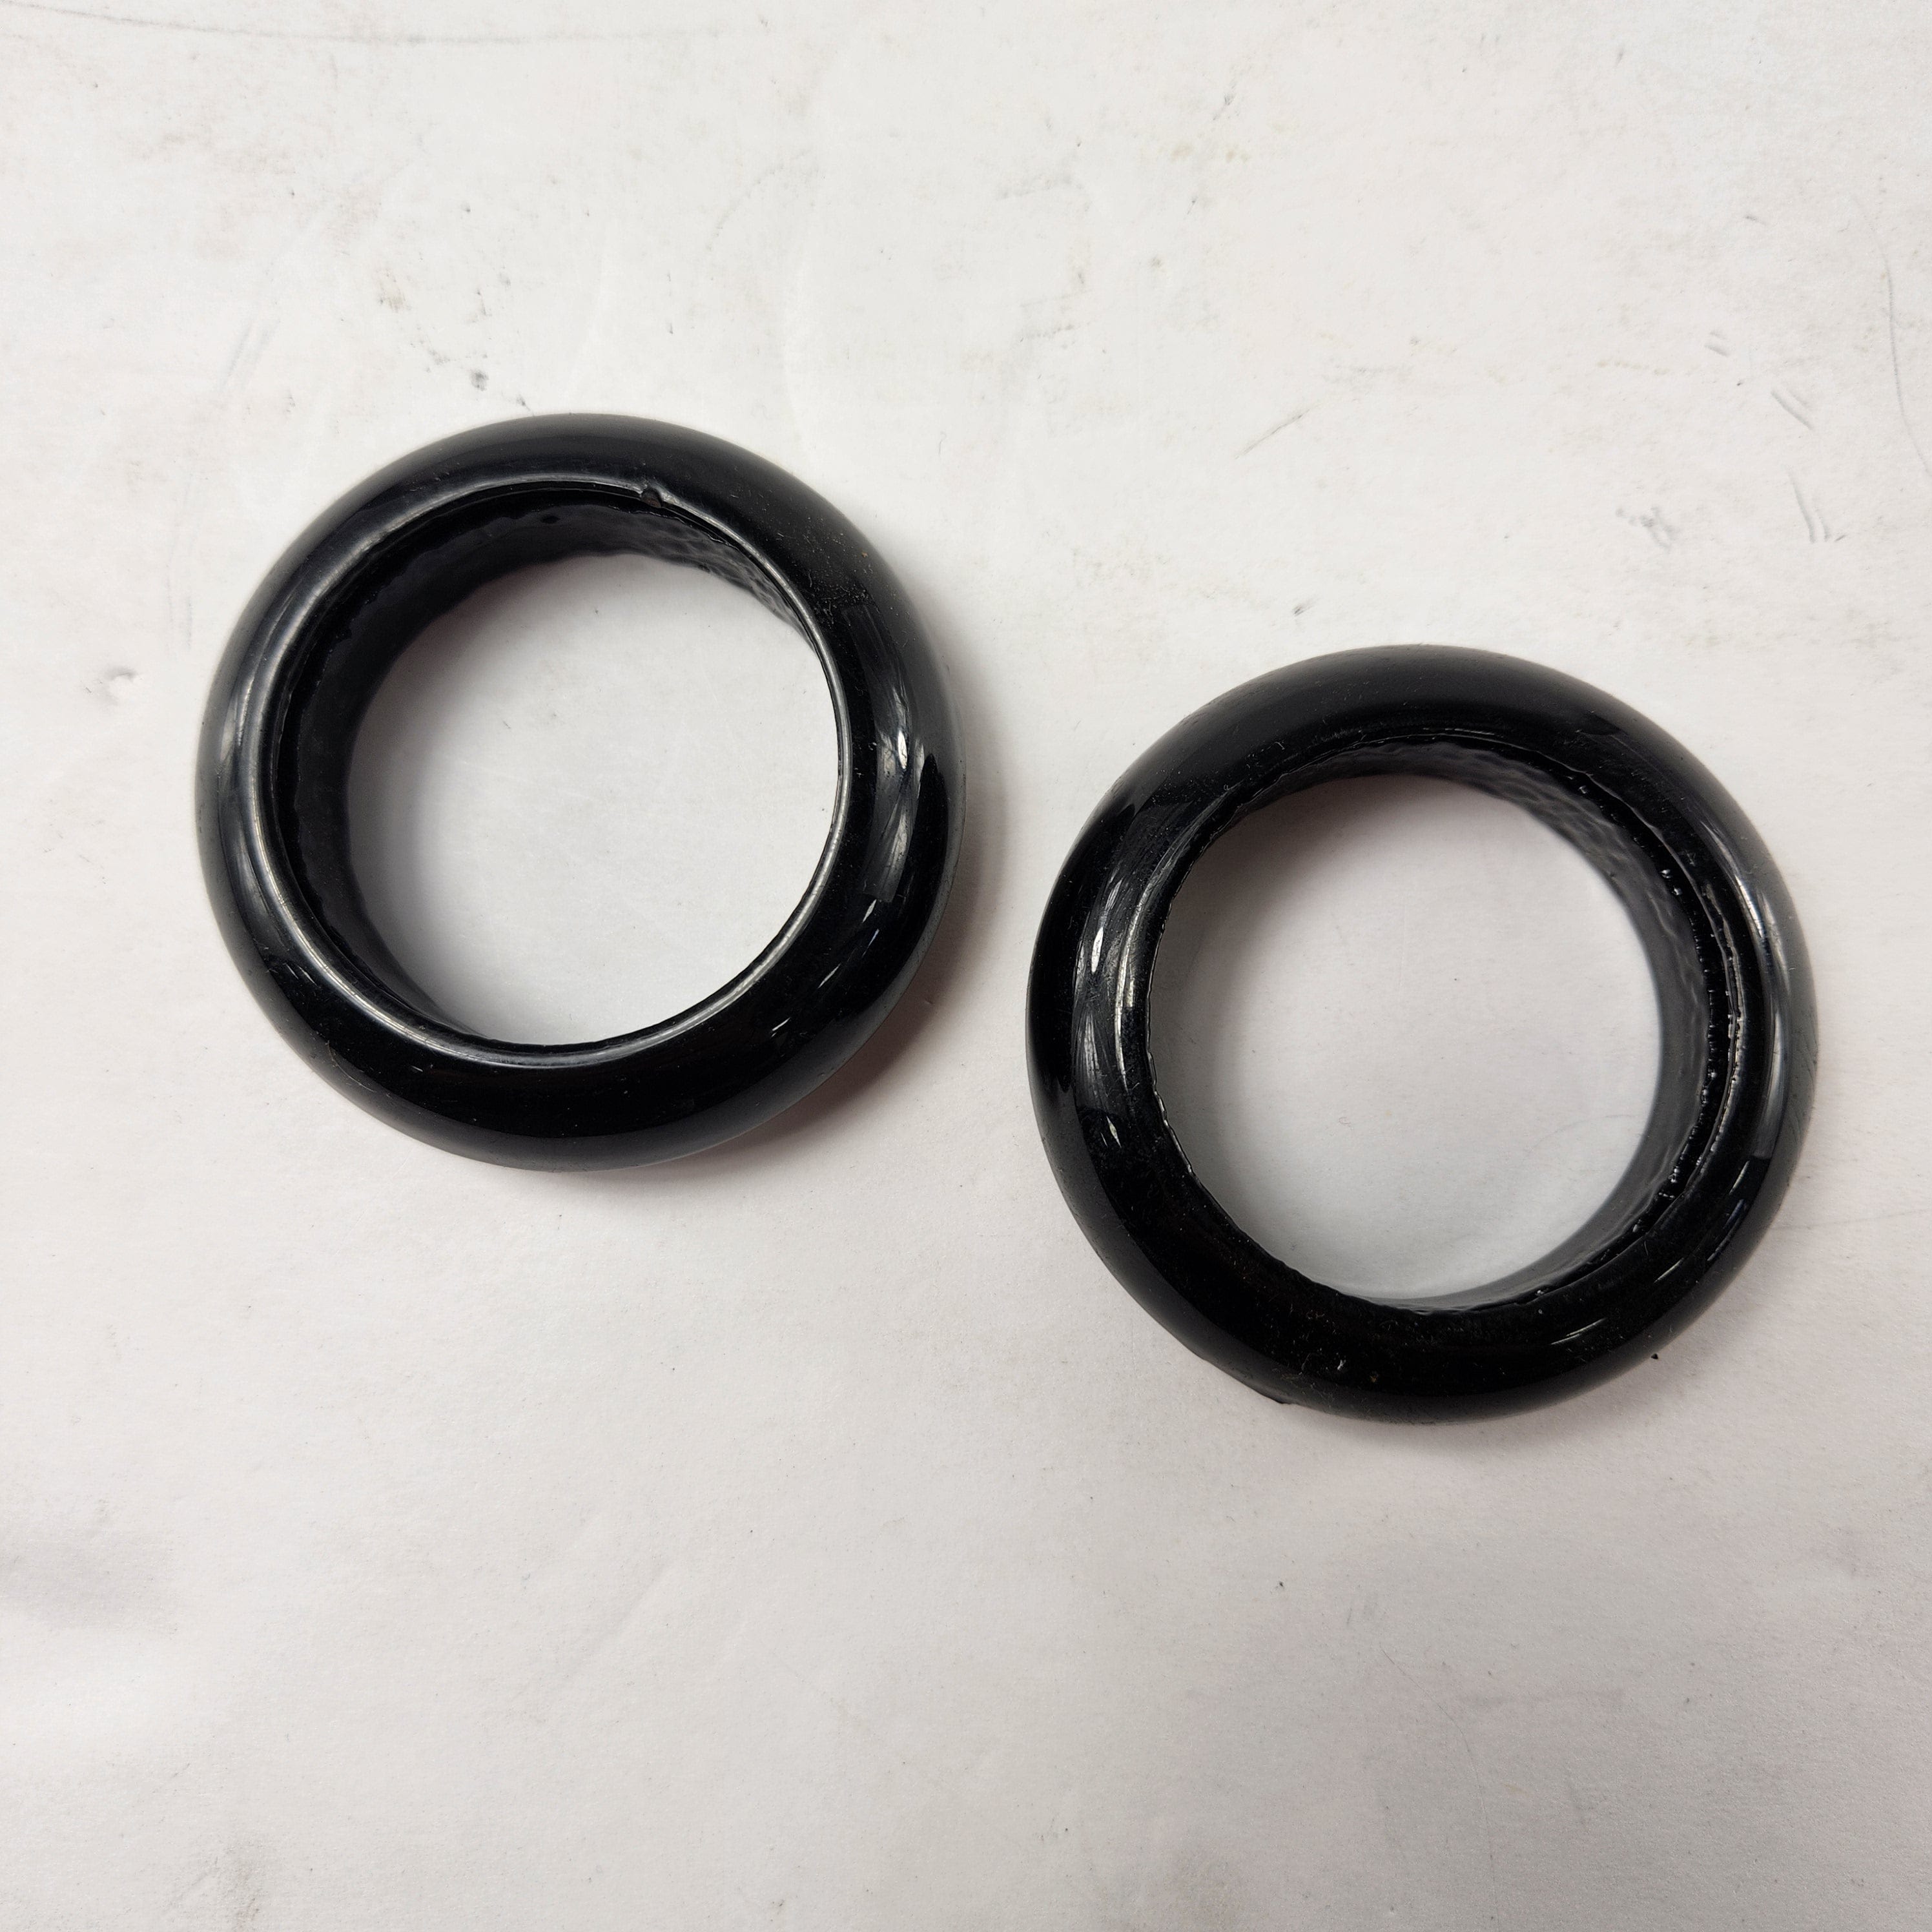 No Longer Available Fork Seals Fork Cap & Dust Seal Black Set (USED) by Polaris 1500167-BLK